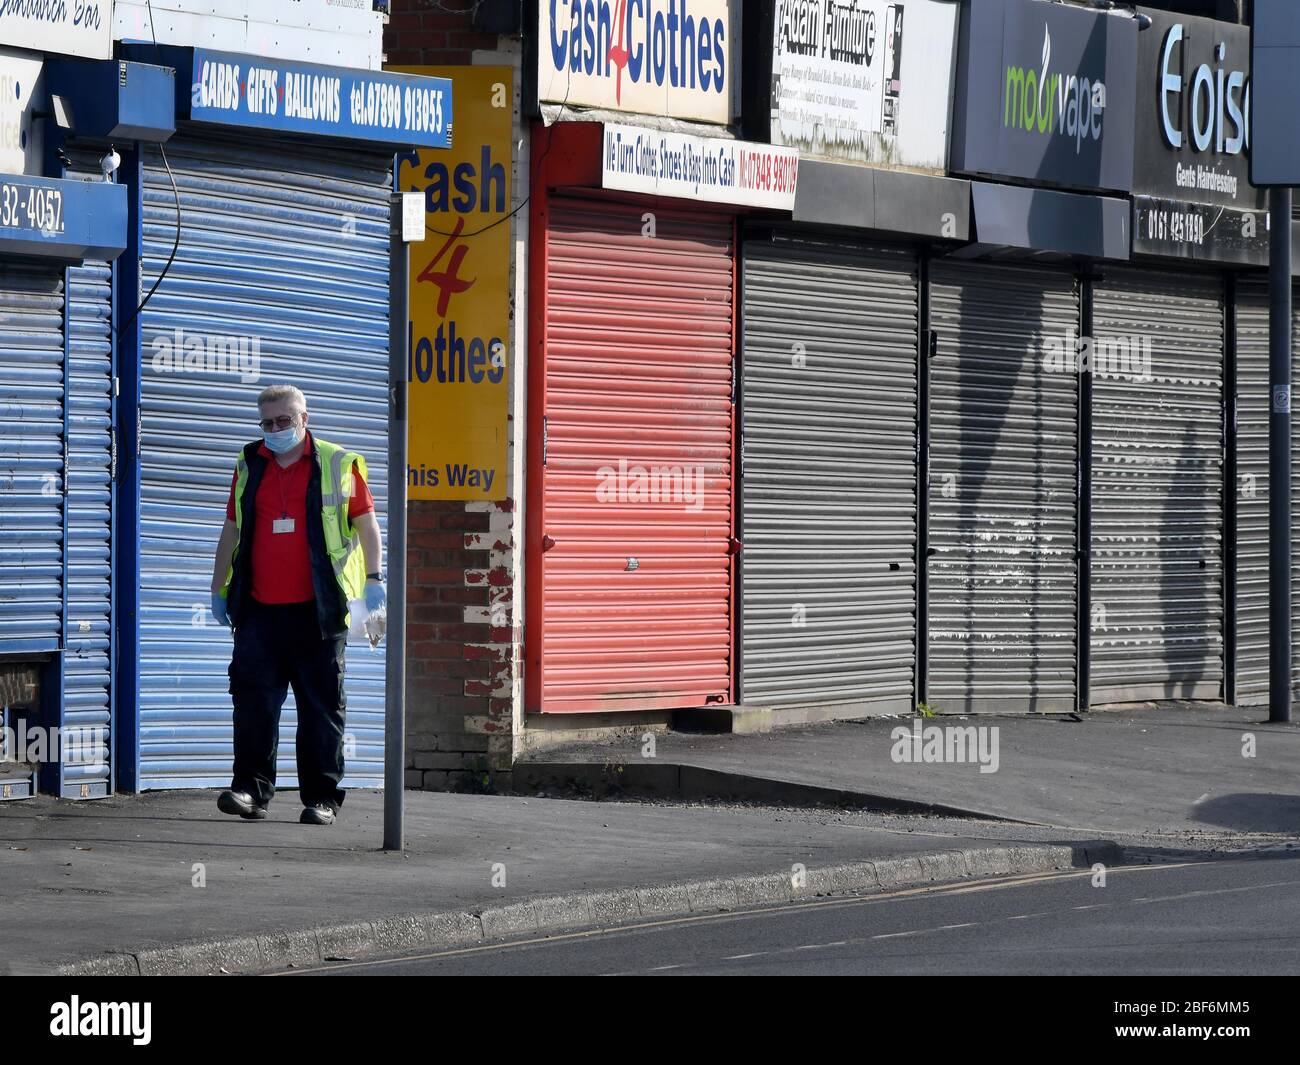 Manchester England 16 April 2020. A row of shuttered shops and small businesses in Stockport that are closed because of the Coronavirus lockdown. Photograph by Howard Walker / Alamy News Live. Stock Photo